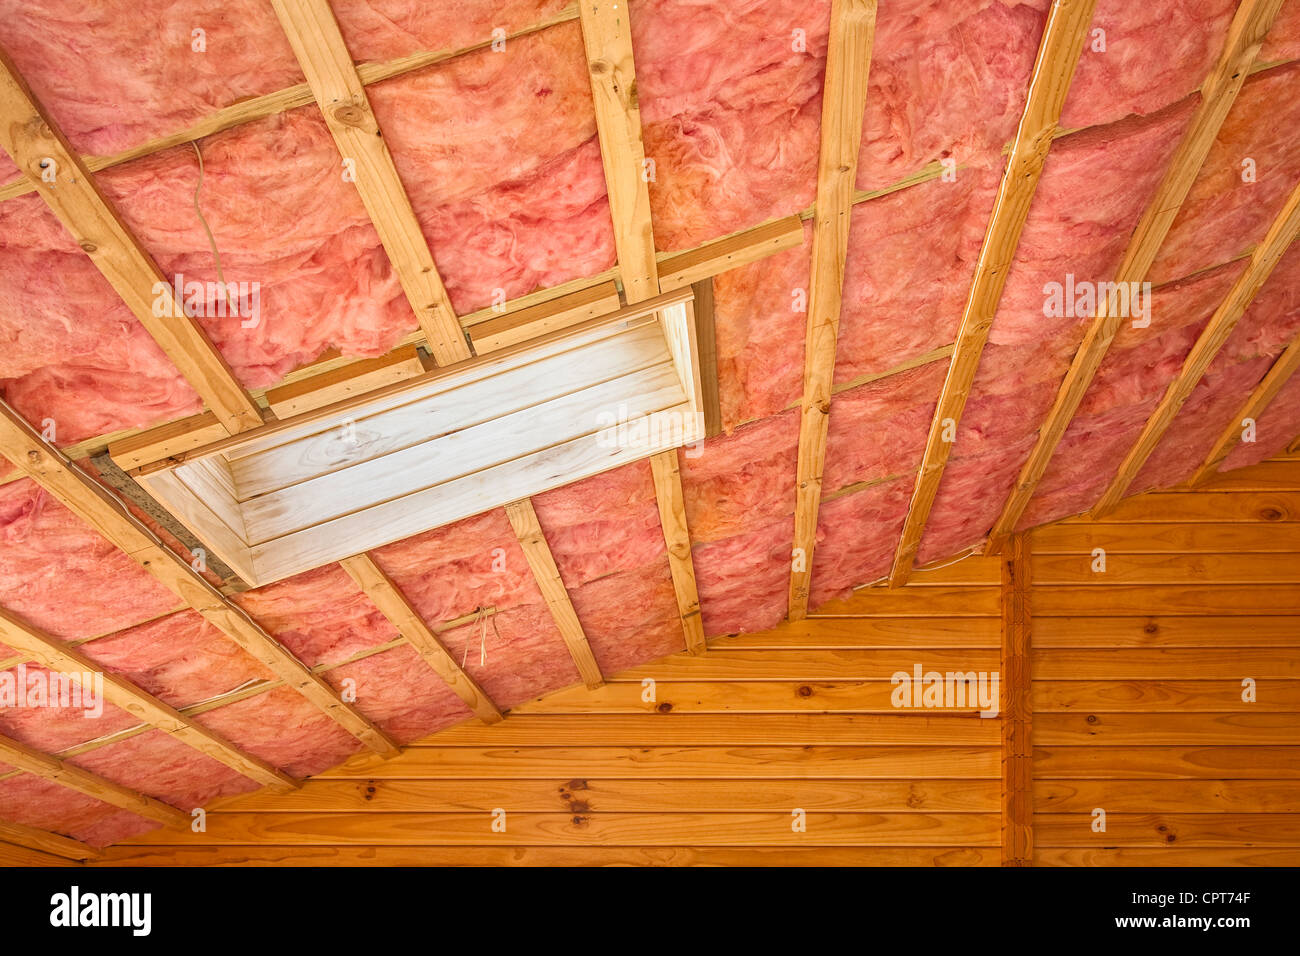 Fibreglass insulation installed in the sloping ceiling of a timber house. Stock Photo